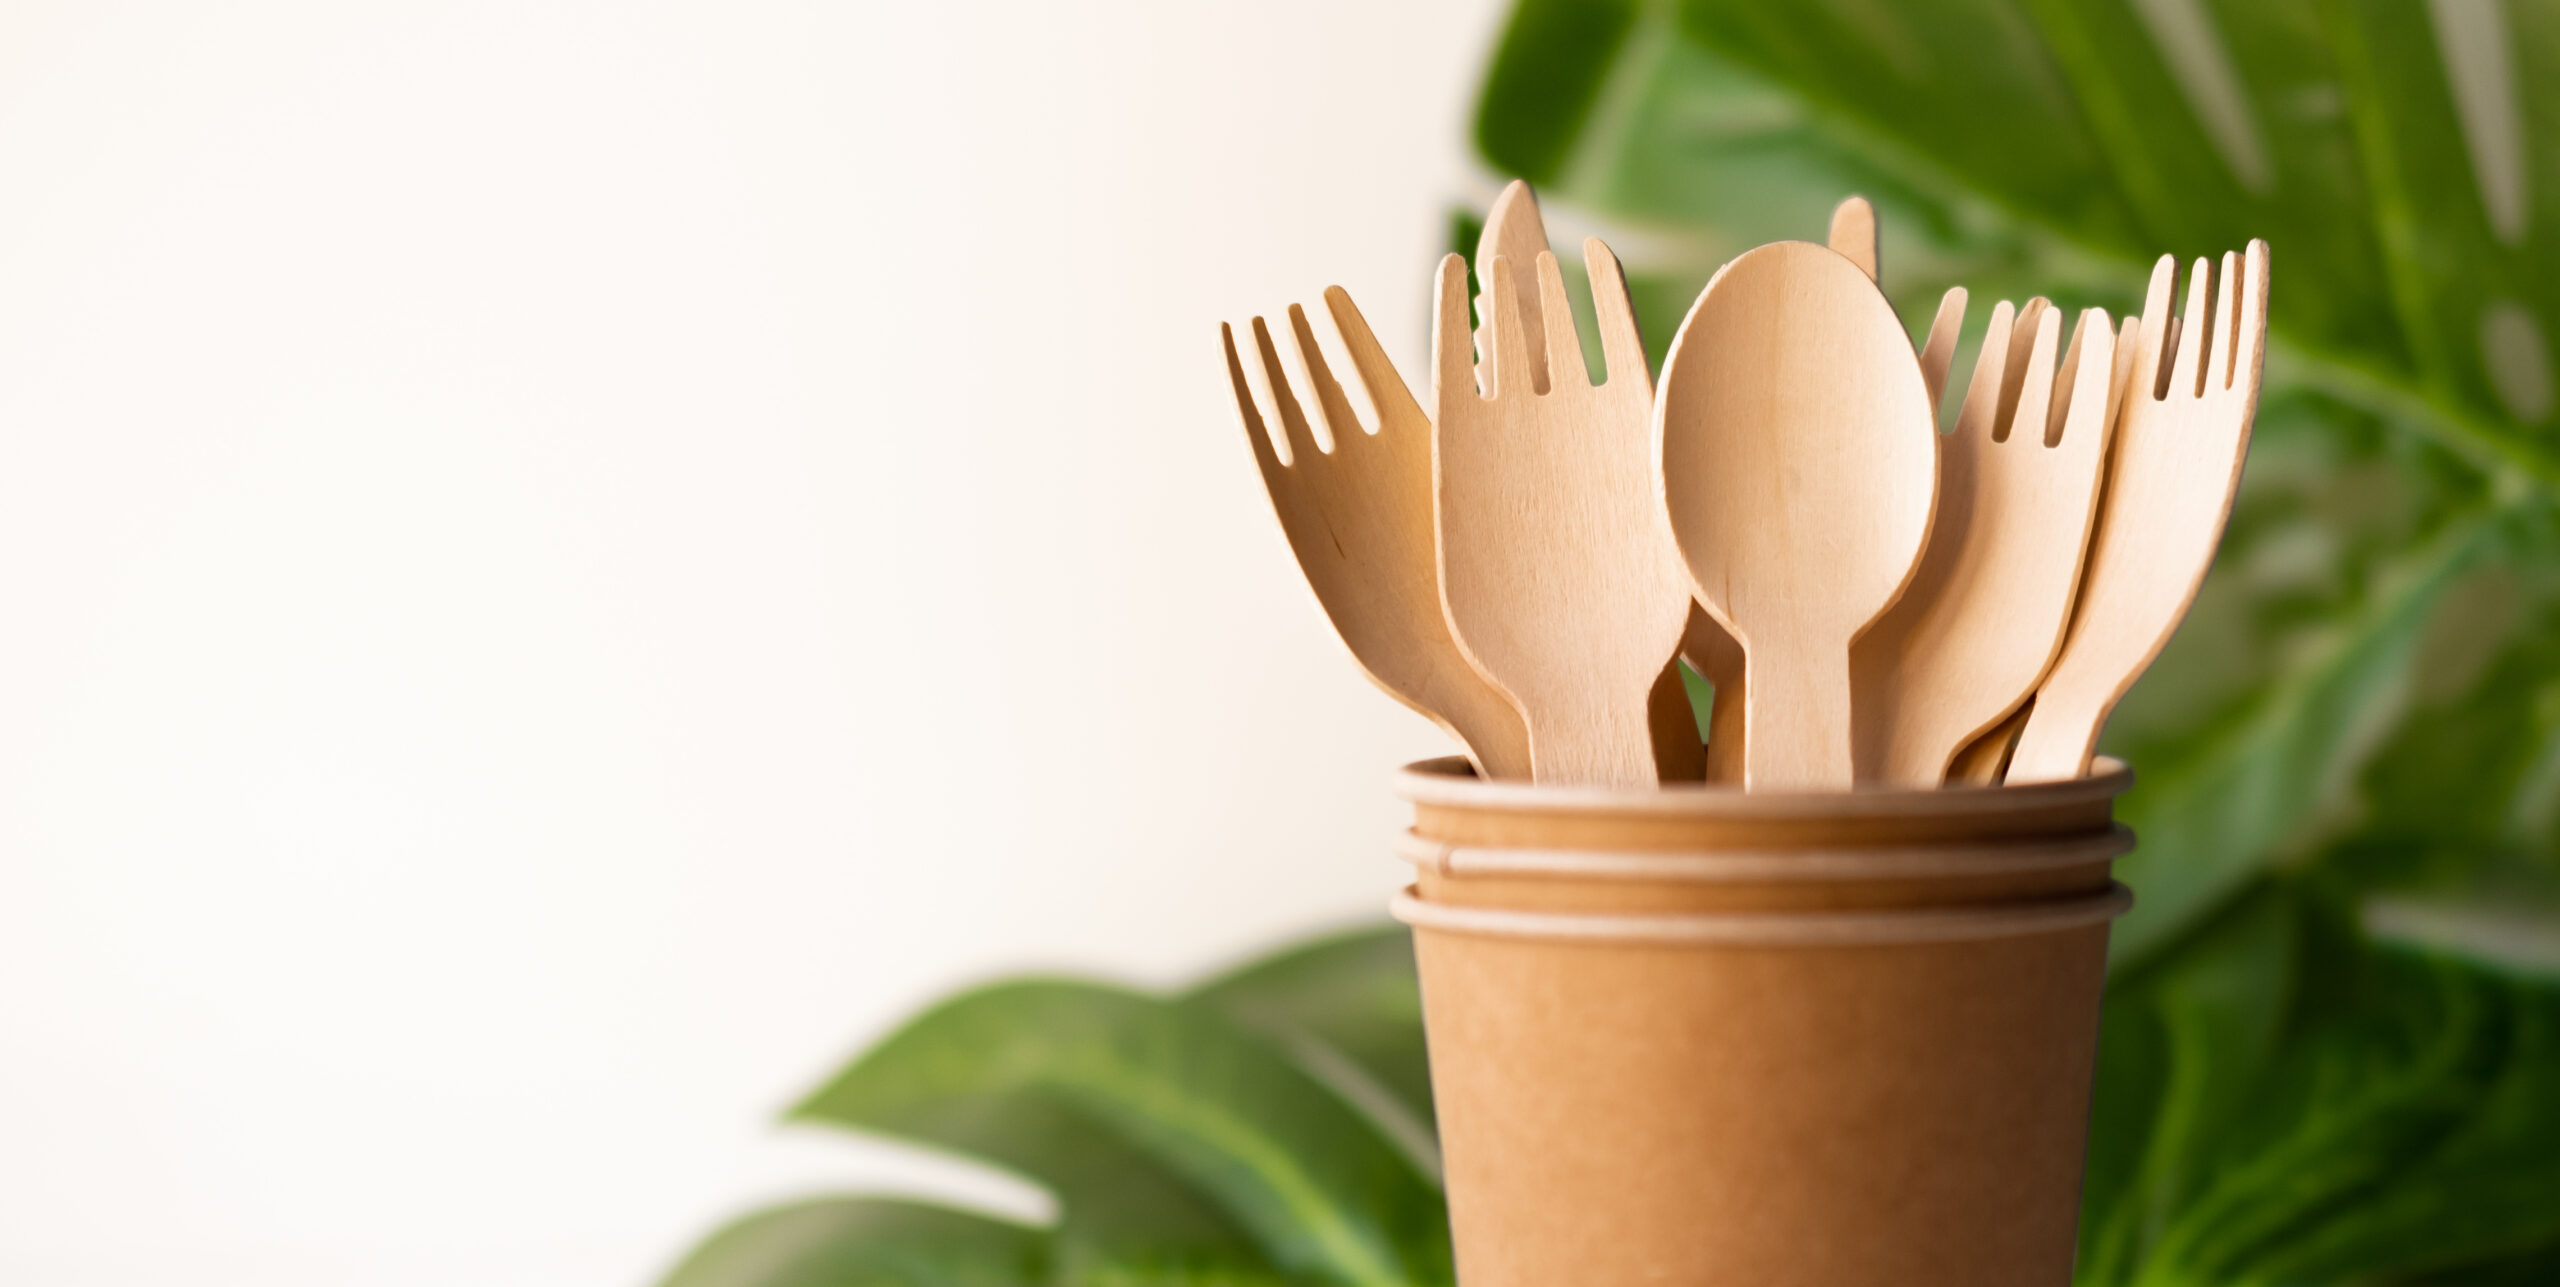 sustainable utensils in a paper cup